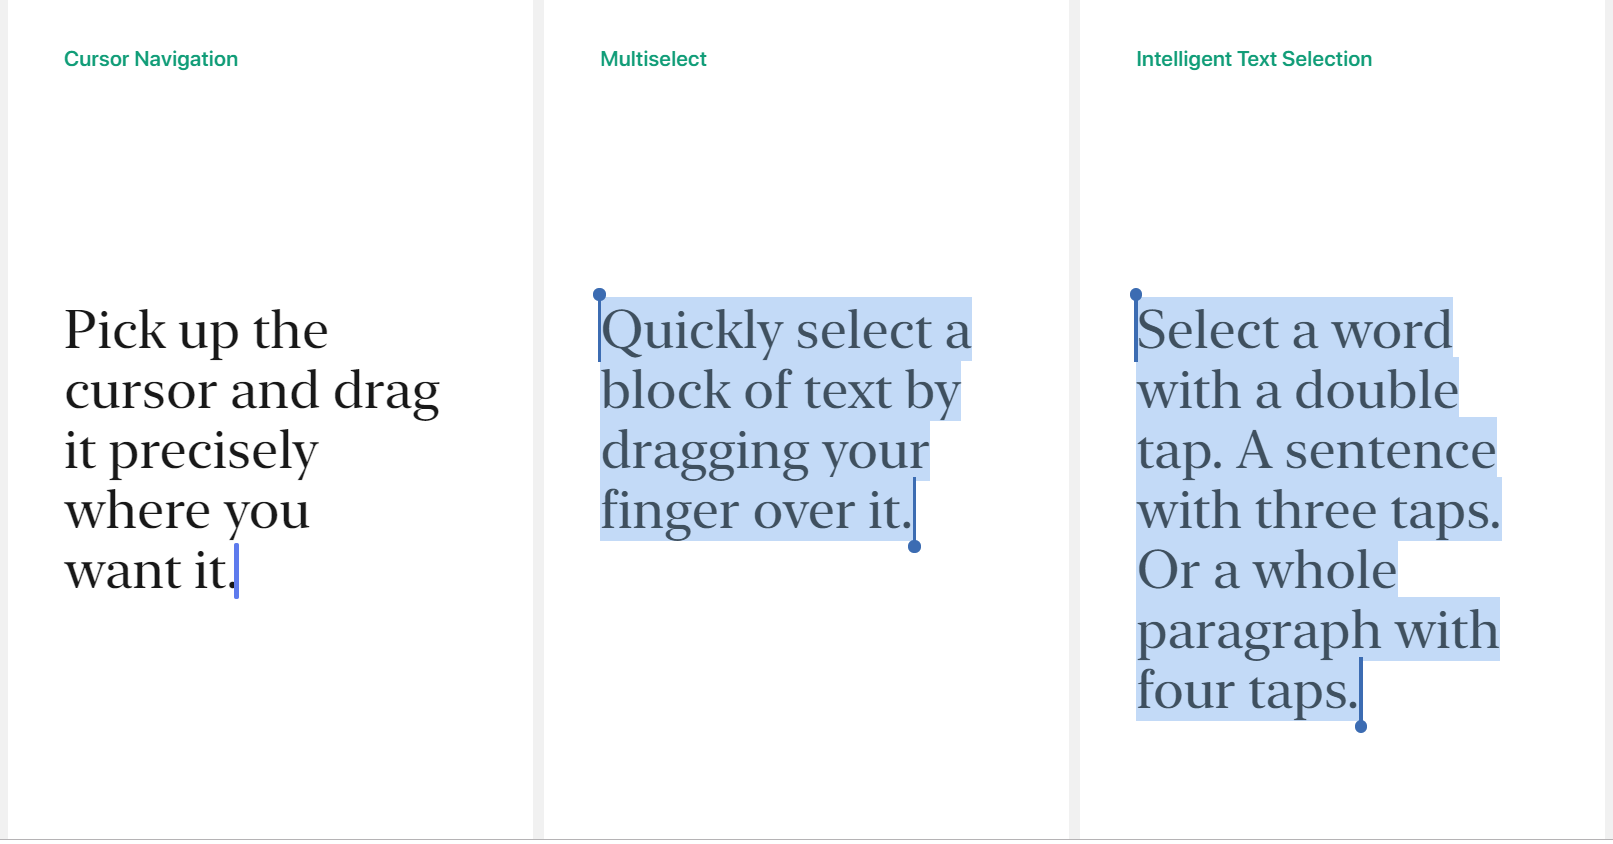 New gestures for editing text